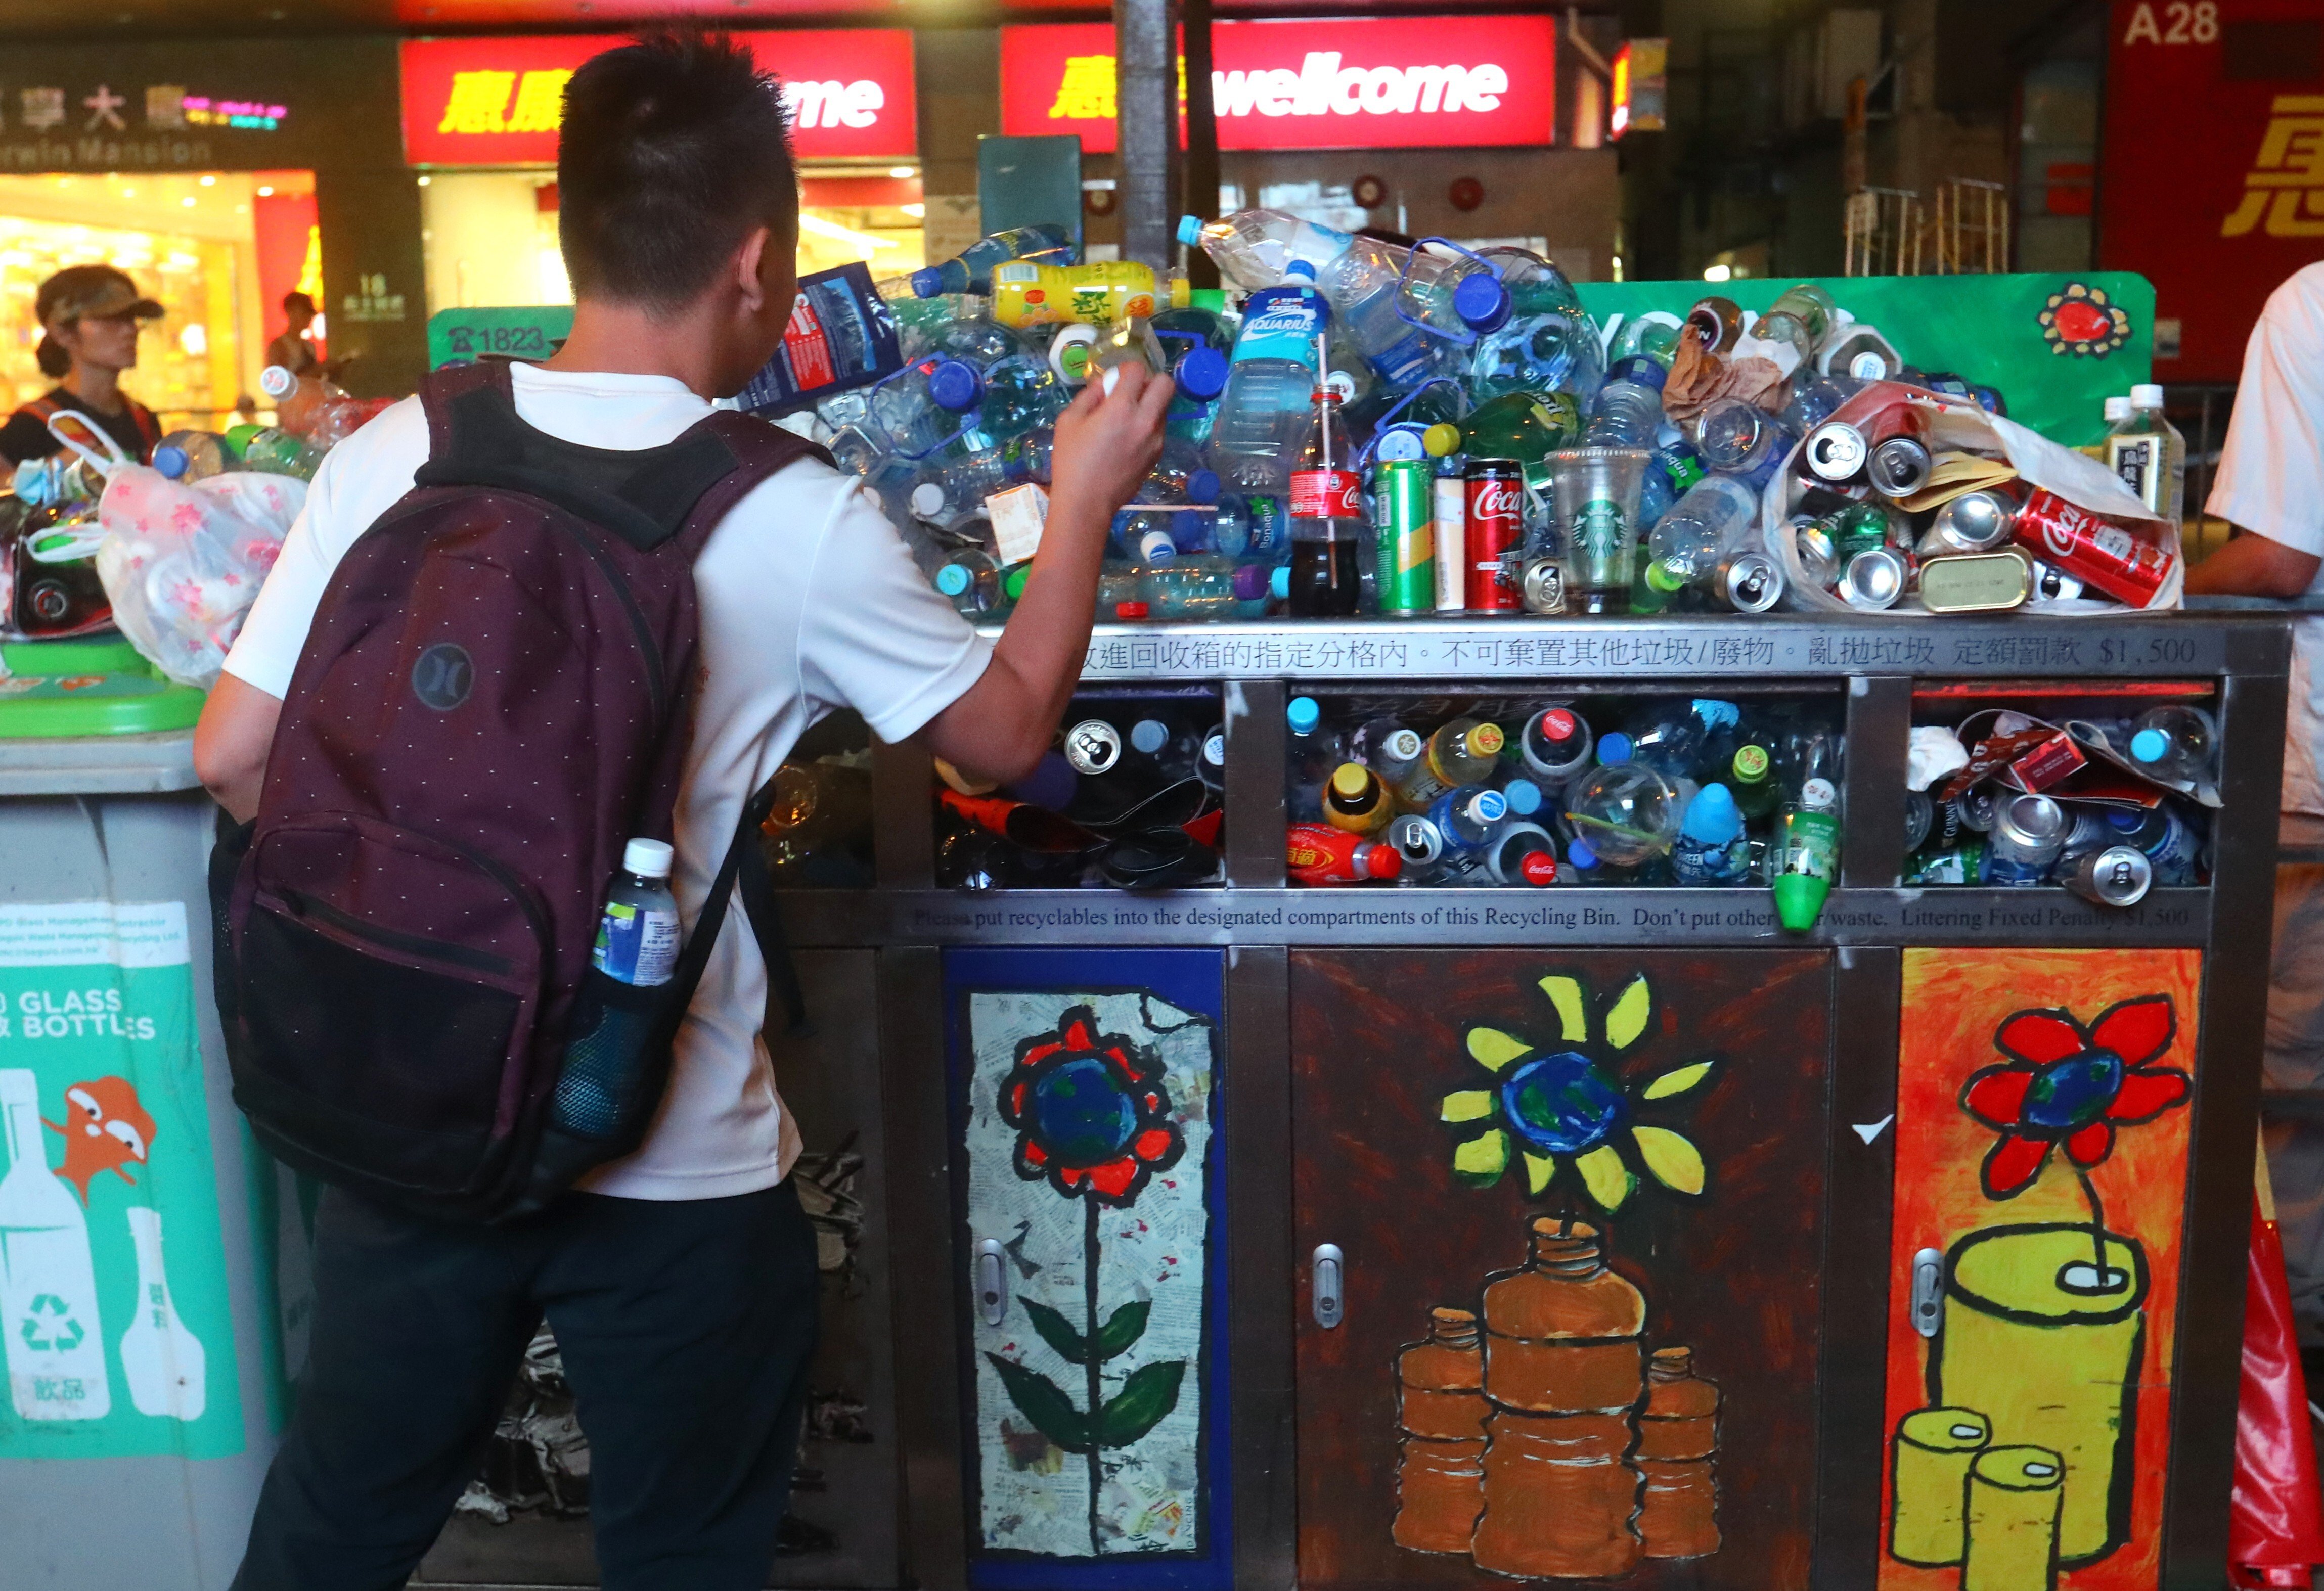 Overfilled recycling bins in Wan Chai on June 9, 2019. The government has good initiatives but more transparency on the goals and outcomes is critical in engaging the public and businesses. Photo: Edmond So